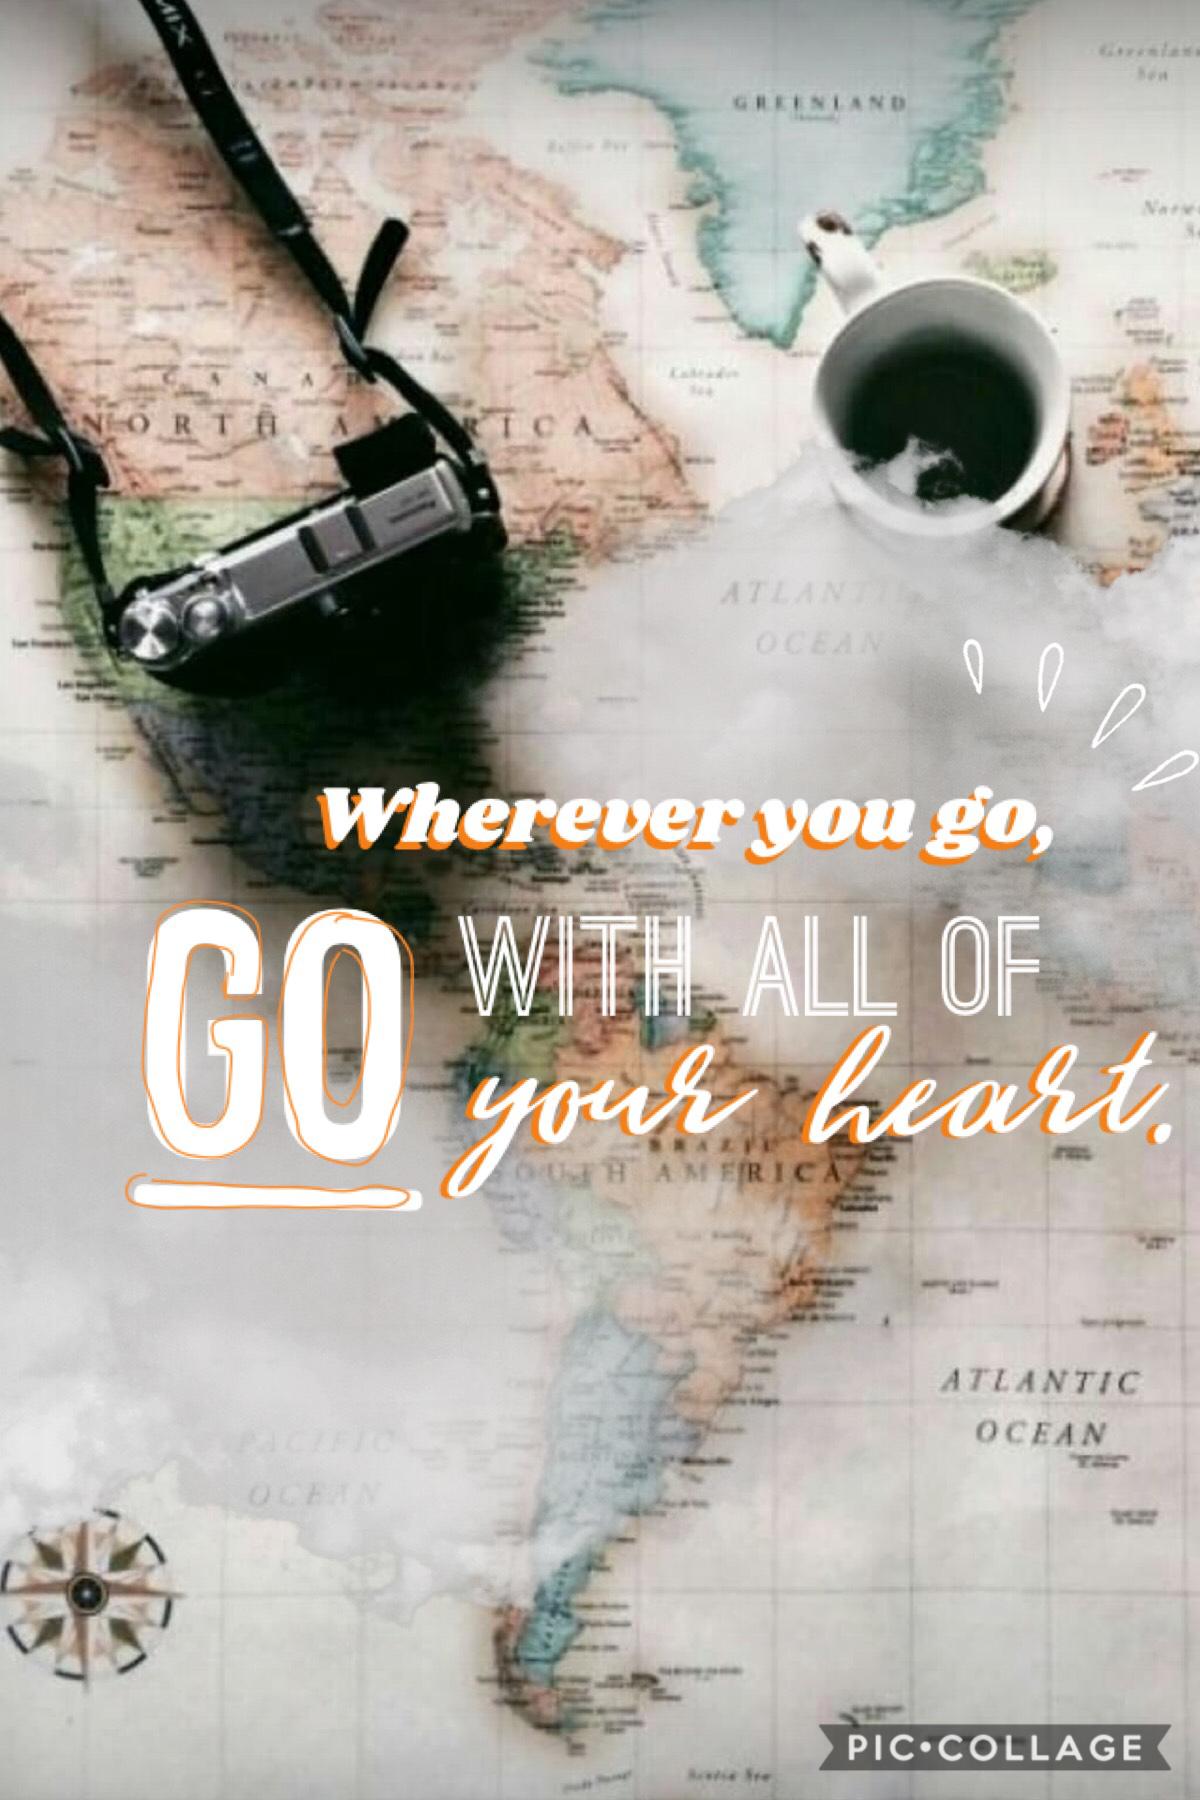 🌎📷Wherever you go, go with all of your heart📷🌎